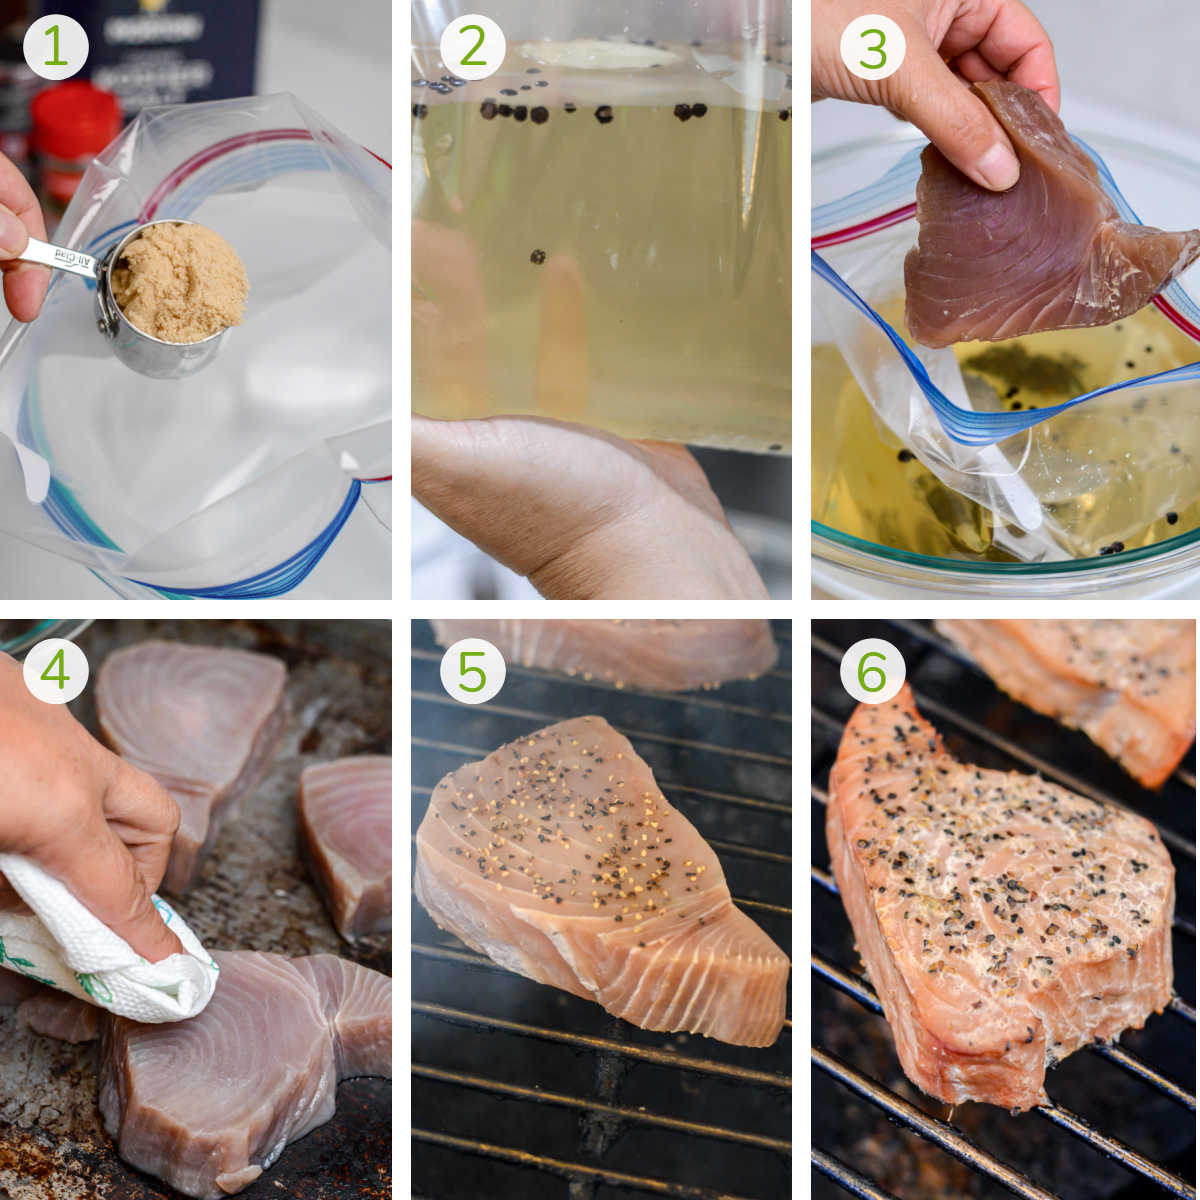 instruction photos showing adding the ingredients to the brine, mixing it, and then smoking the tuna steaks.